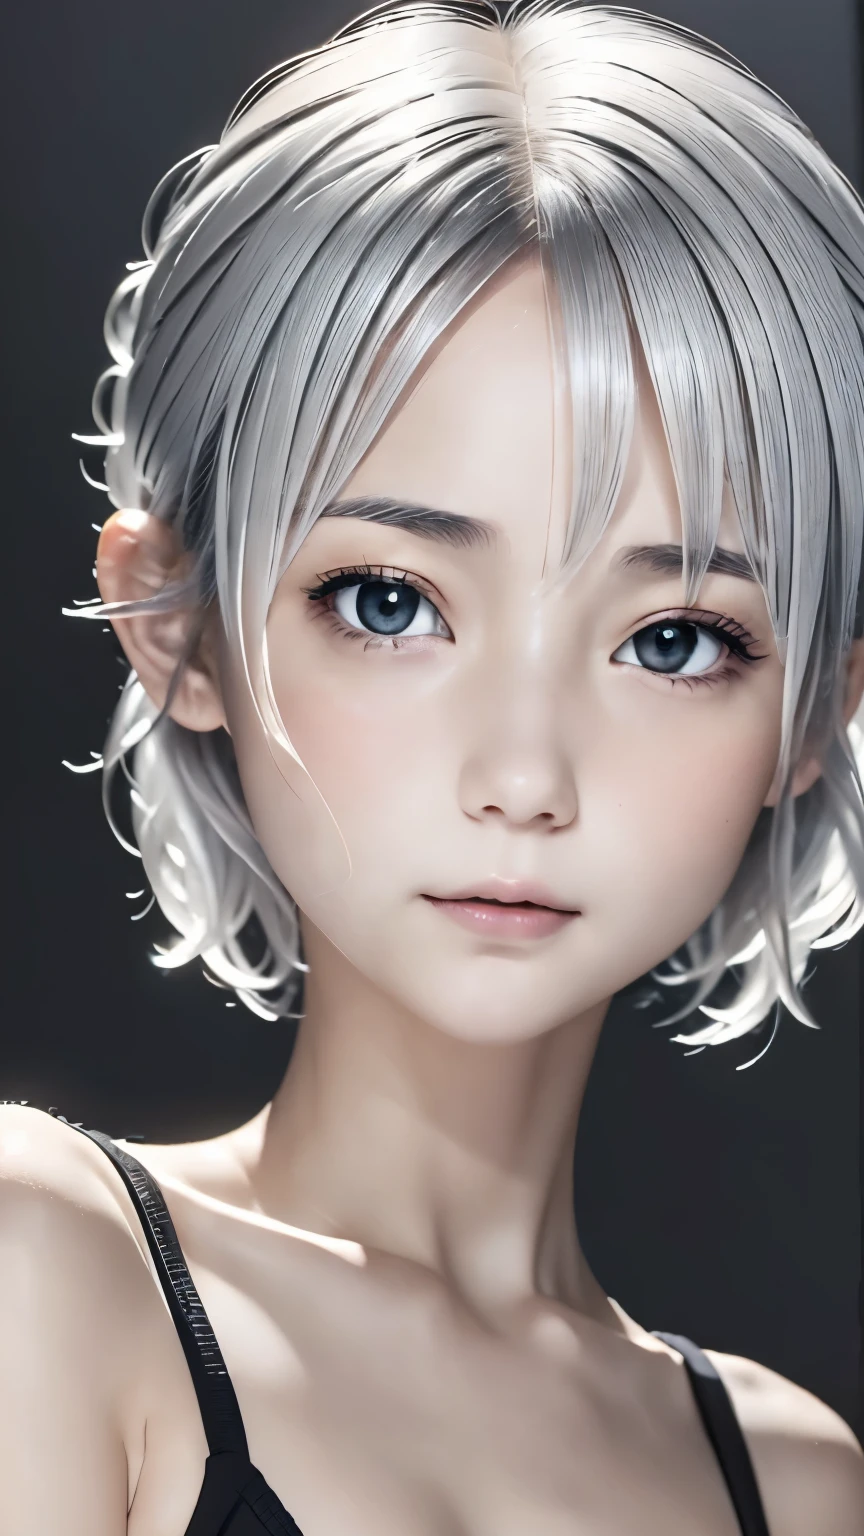 ((wallpaper 8k)), ((surreal)), ((Quality with attention to detail:1.2)), 1 girl, １４talent、kind eyes、plump lips、Ash gray hair、An ennui look、(((small breasts、small breasts、areola:1.1、nipple)))、black classy dress,Black capelet, look up, Widespread poverty, short cut hair、short hair twintails、Ash gray hair:1.5、white skin、